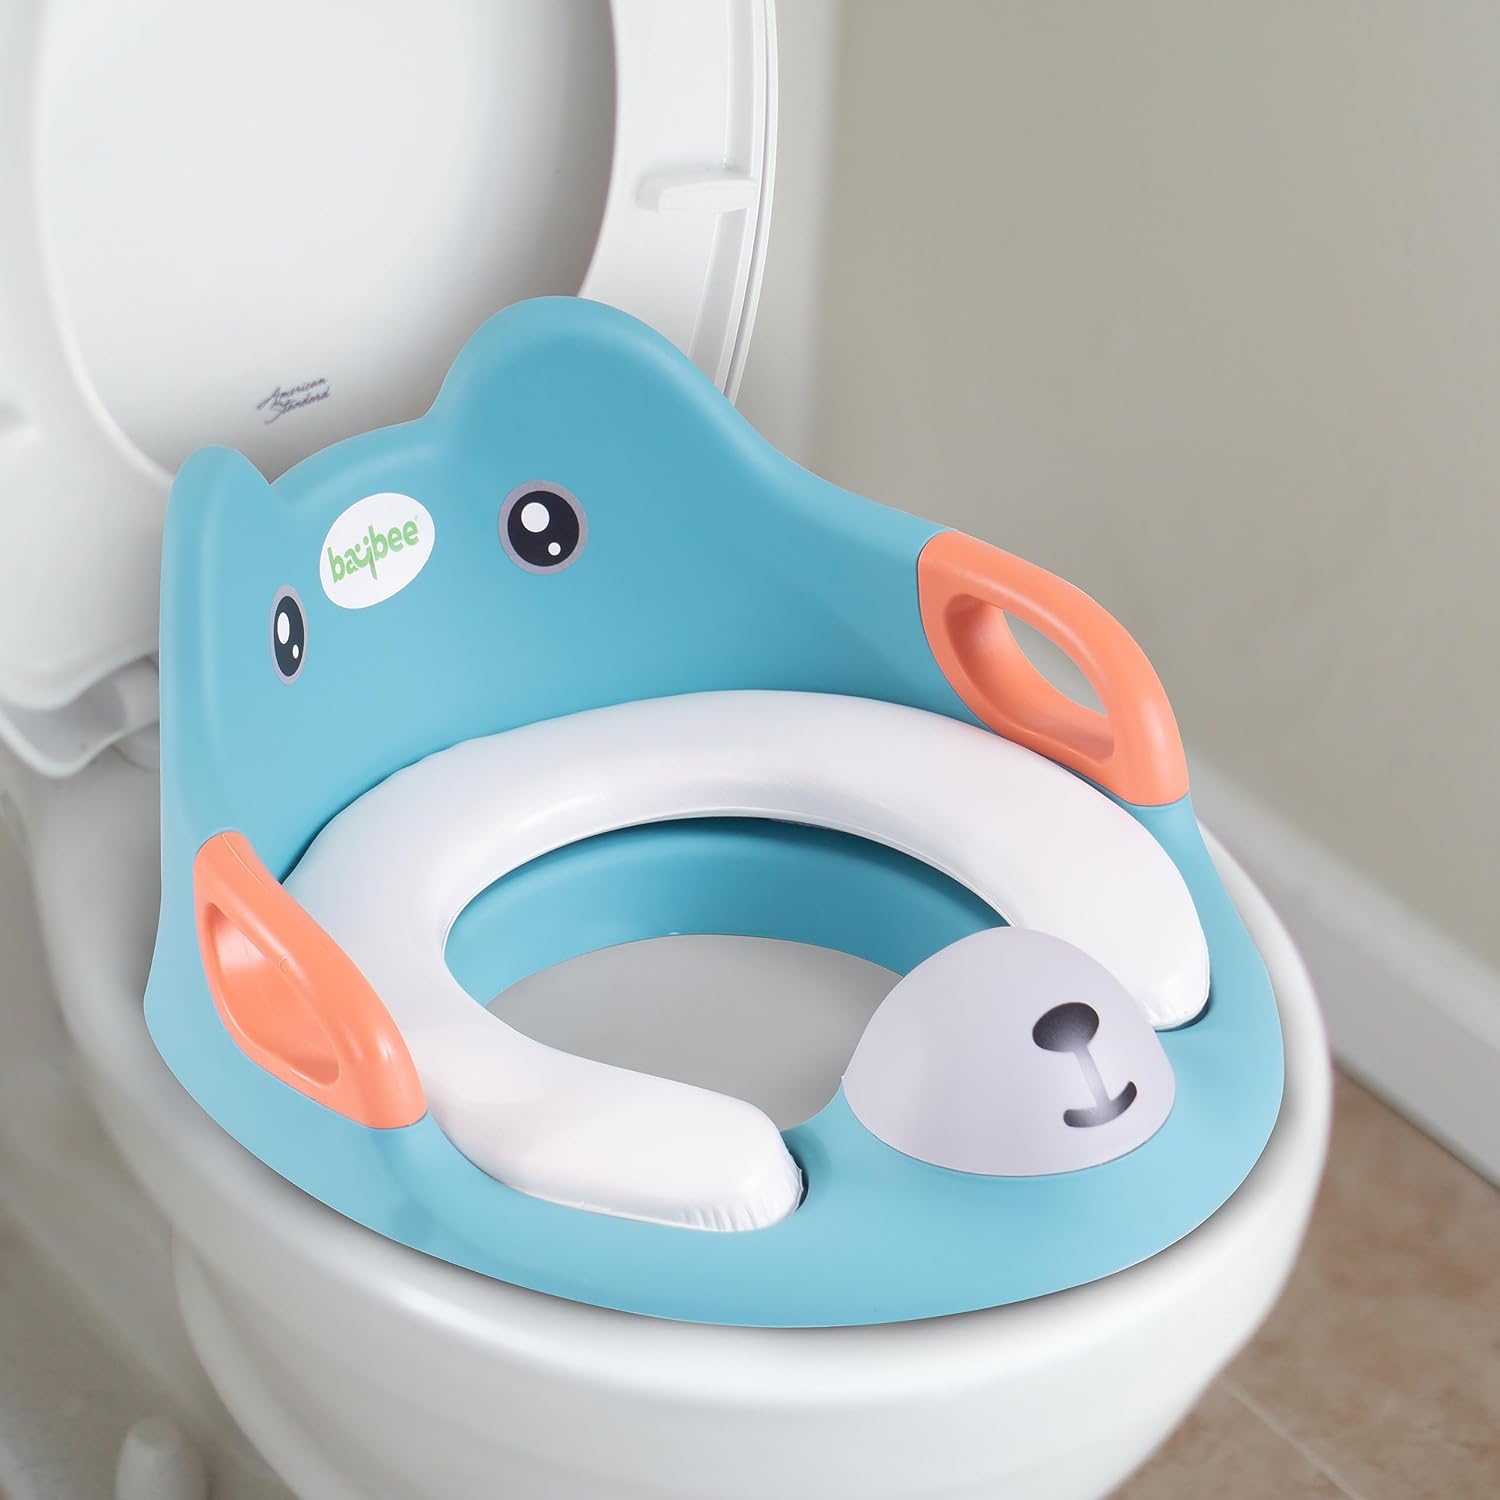 Minikin Prodigy Baby Potty Training Seat Cover for Western Toilet I Soft cushion seat with Handle I Universal Fit I